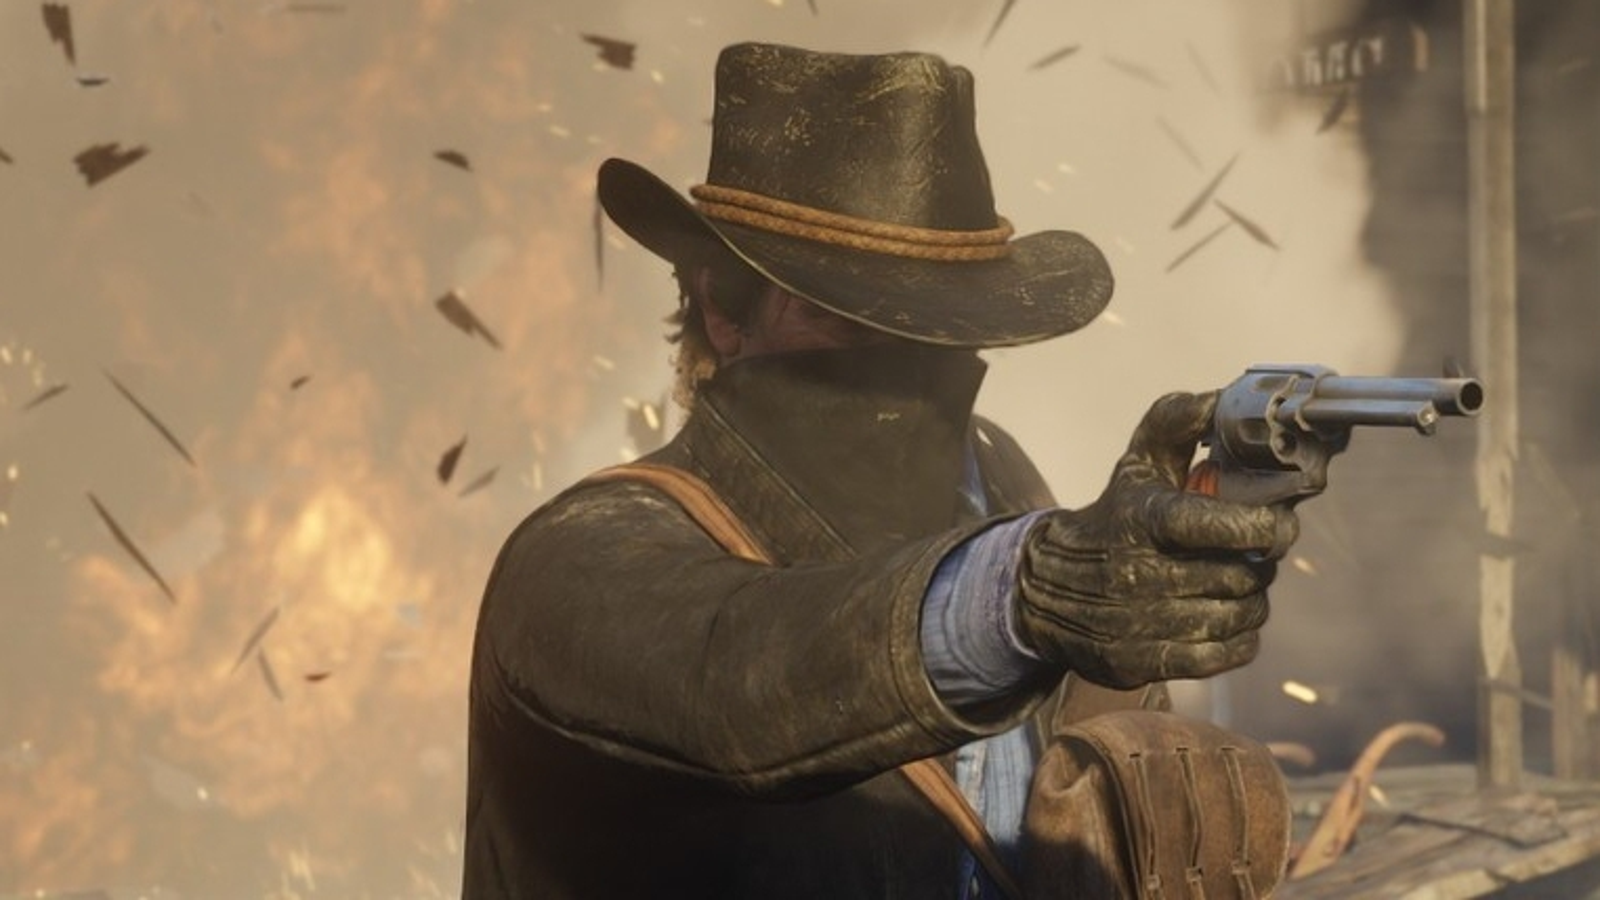 Red Dead Redemption on PS4 and Nintendo Switch Confirmed, PC